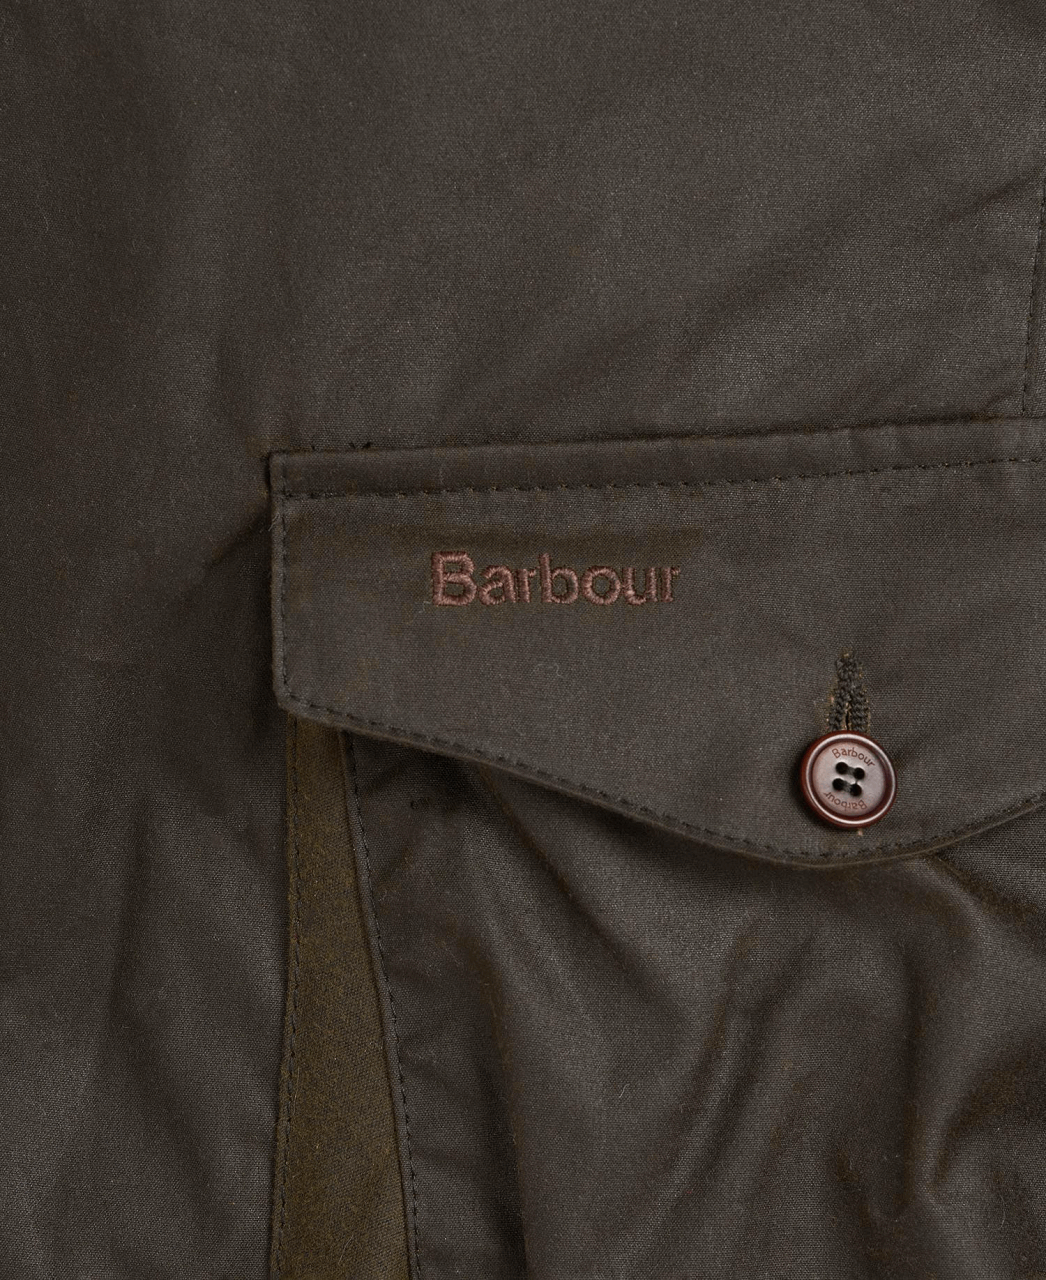 Barbour Beacon Sports Jacket - olive